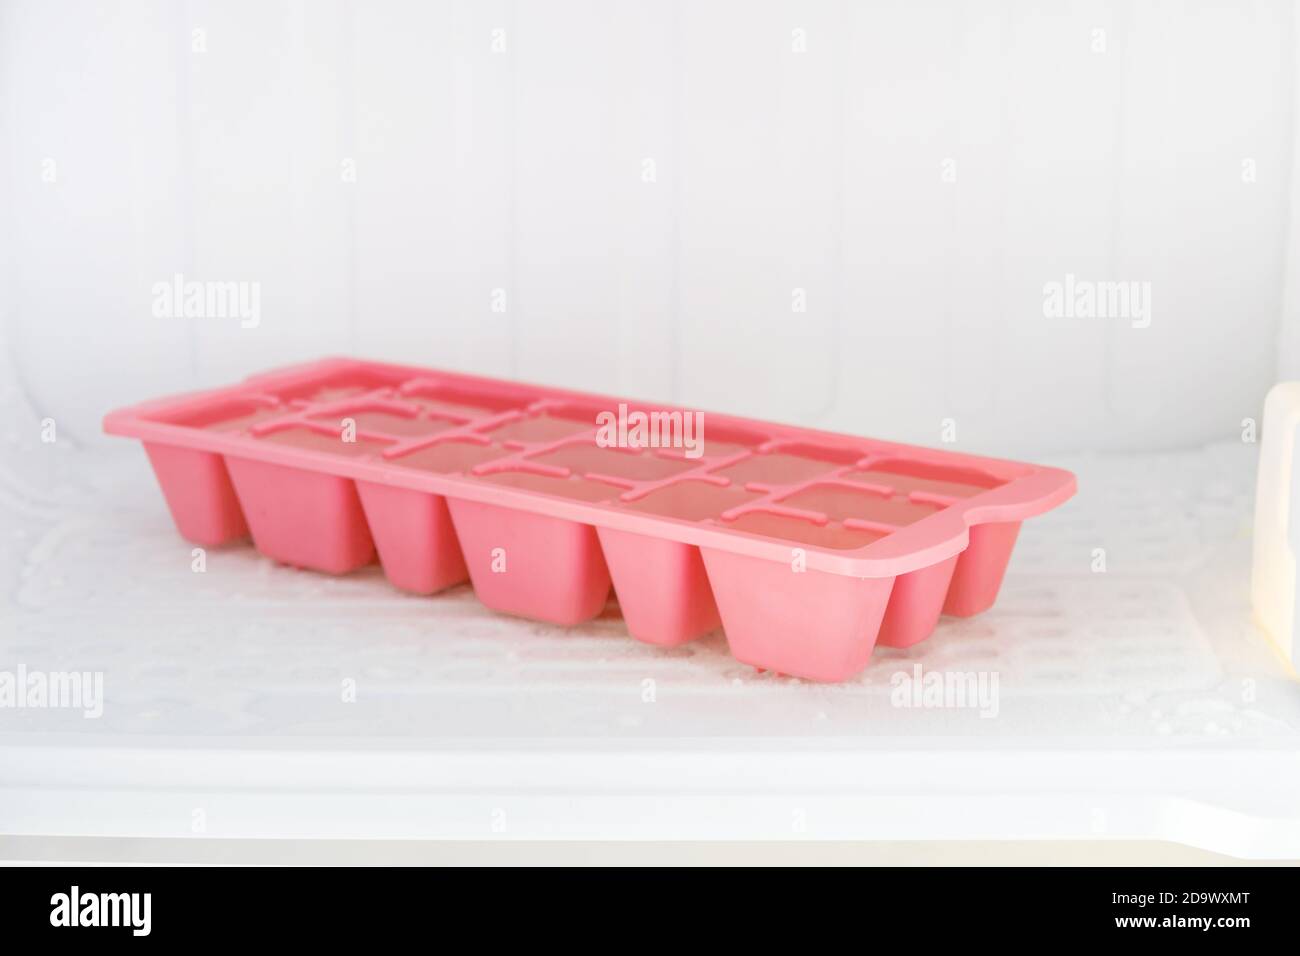 1930s Cold Frosty Aluminum Ice Cube Tray Photograph by Vintage